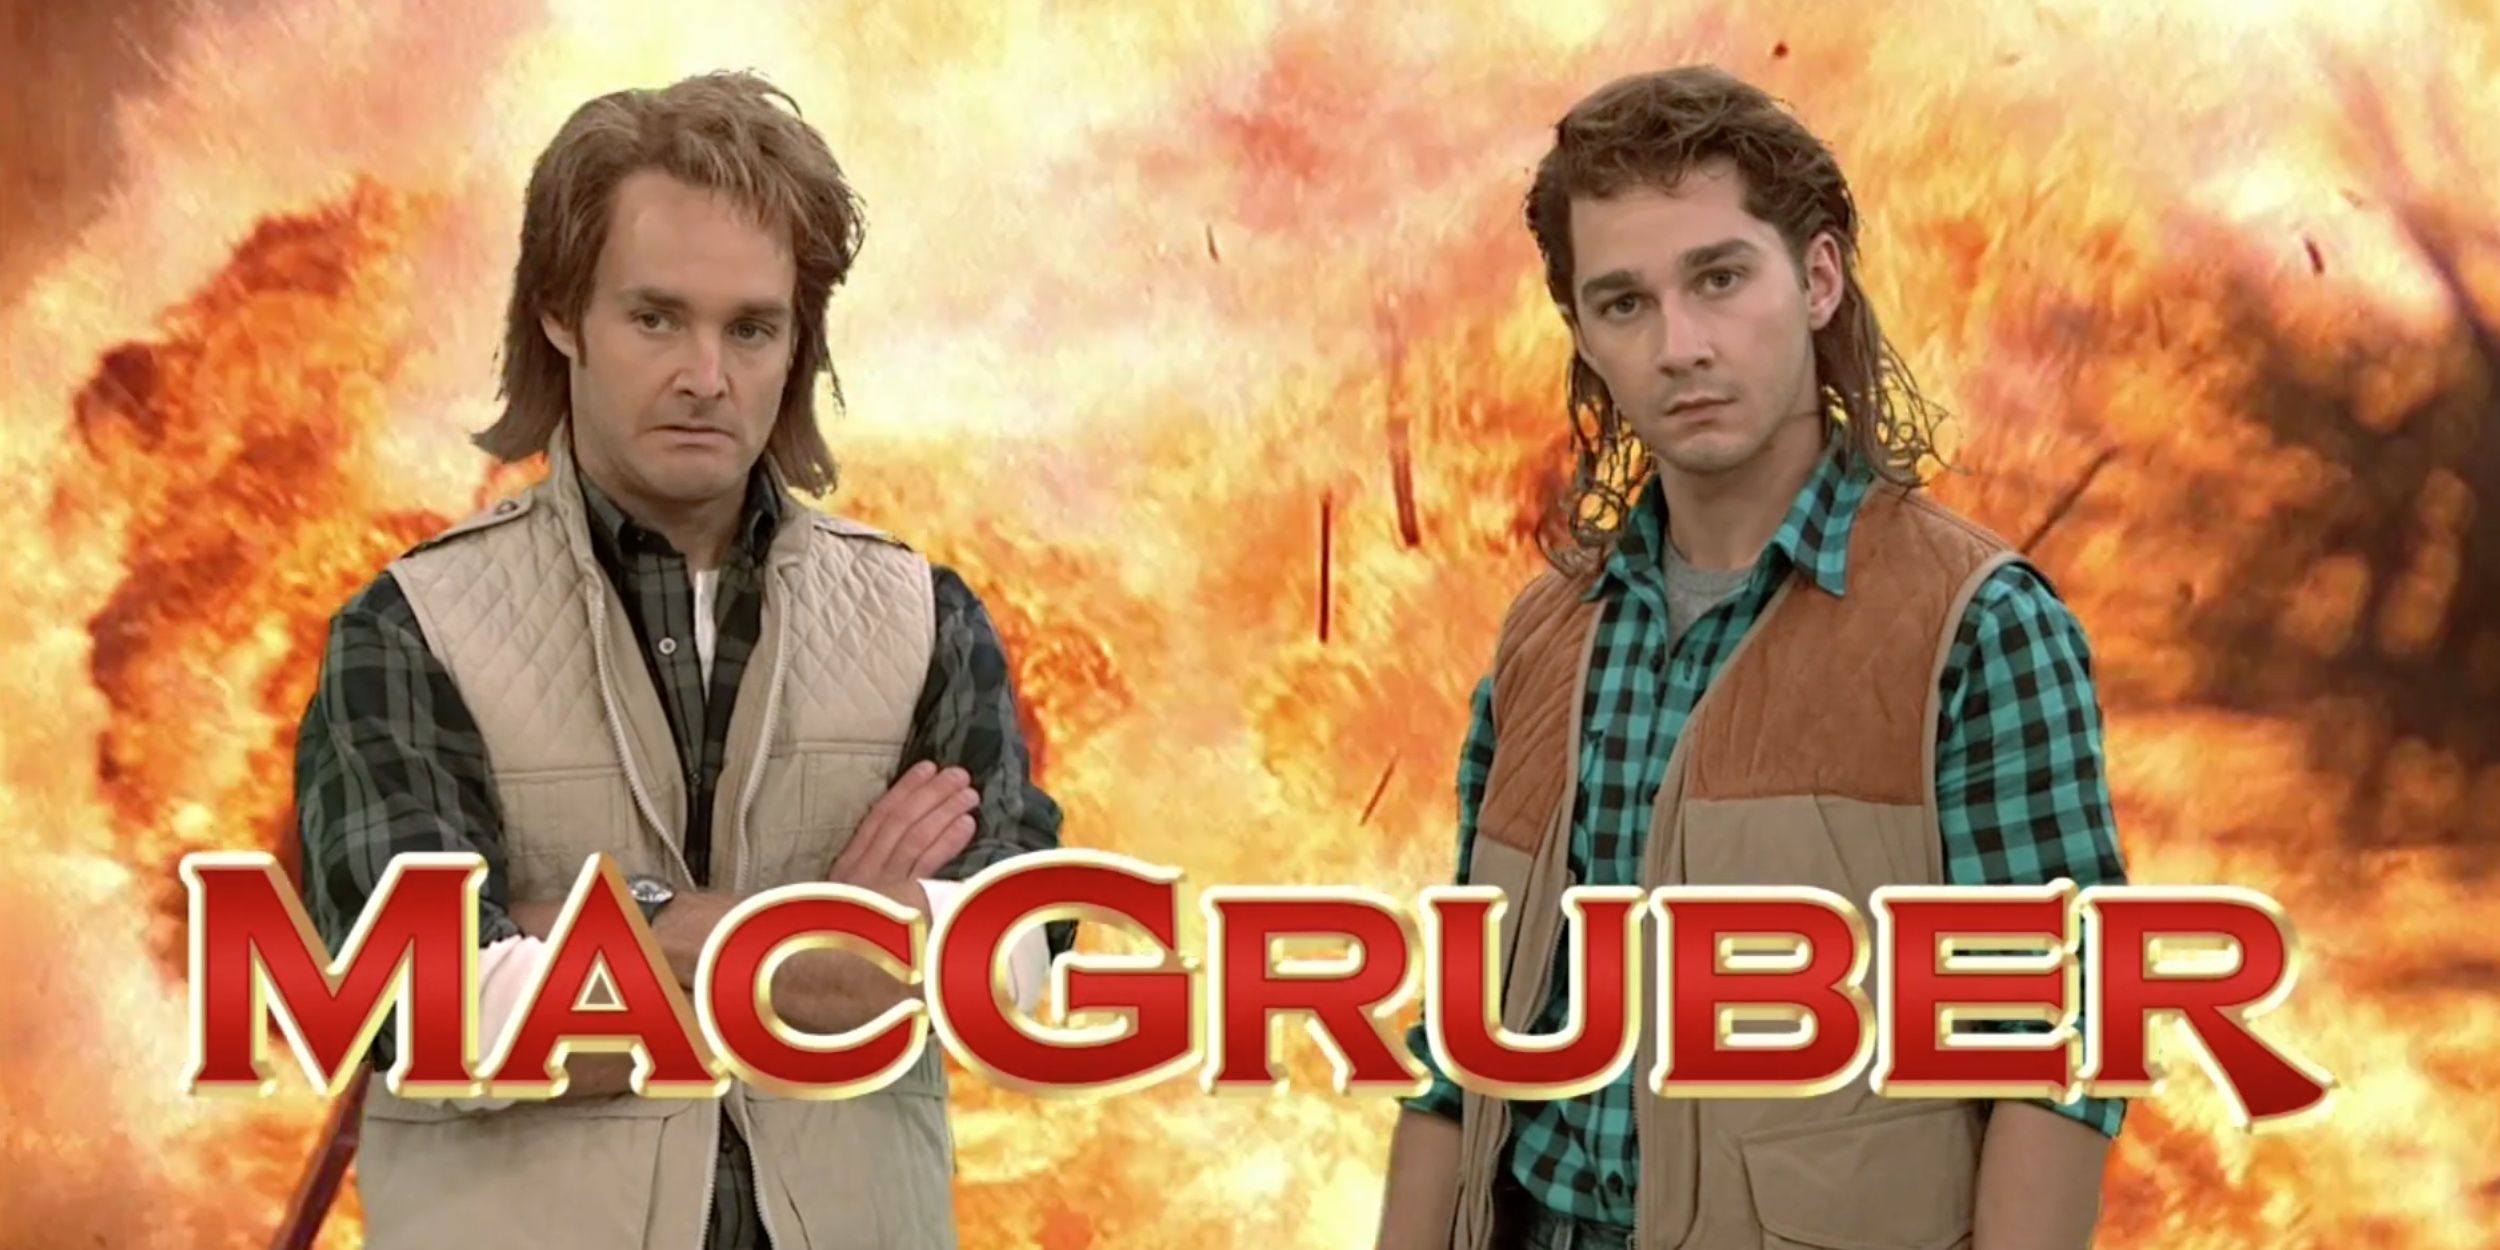 Will Forte and Shia LaBeouf in a MacGruber sketch on SNL